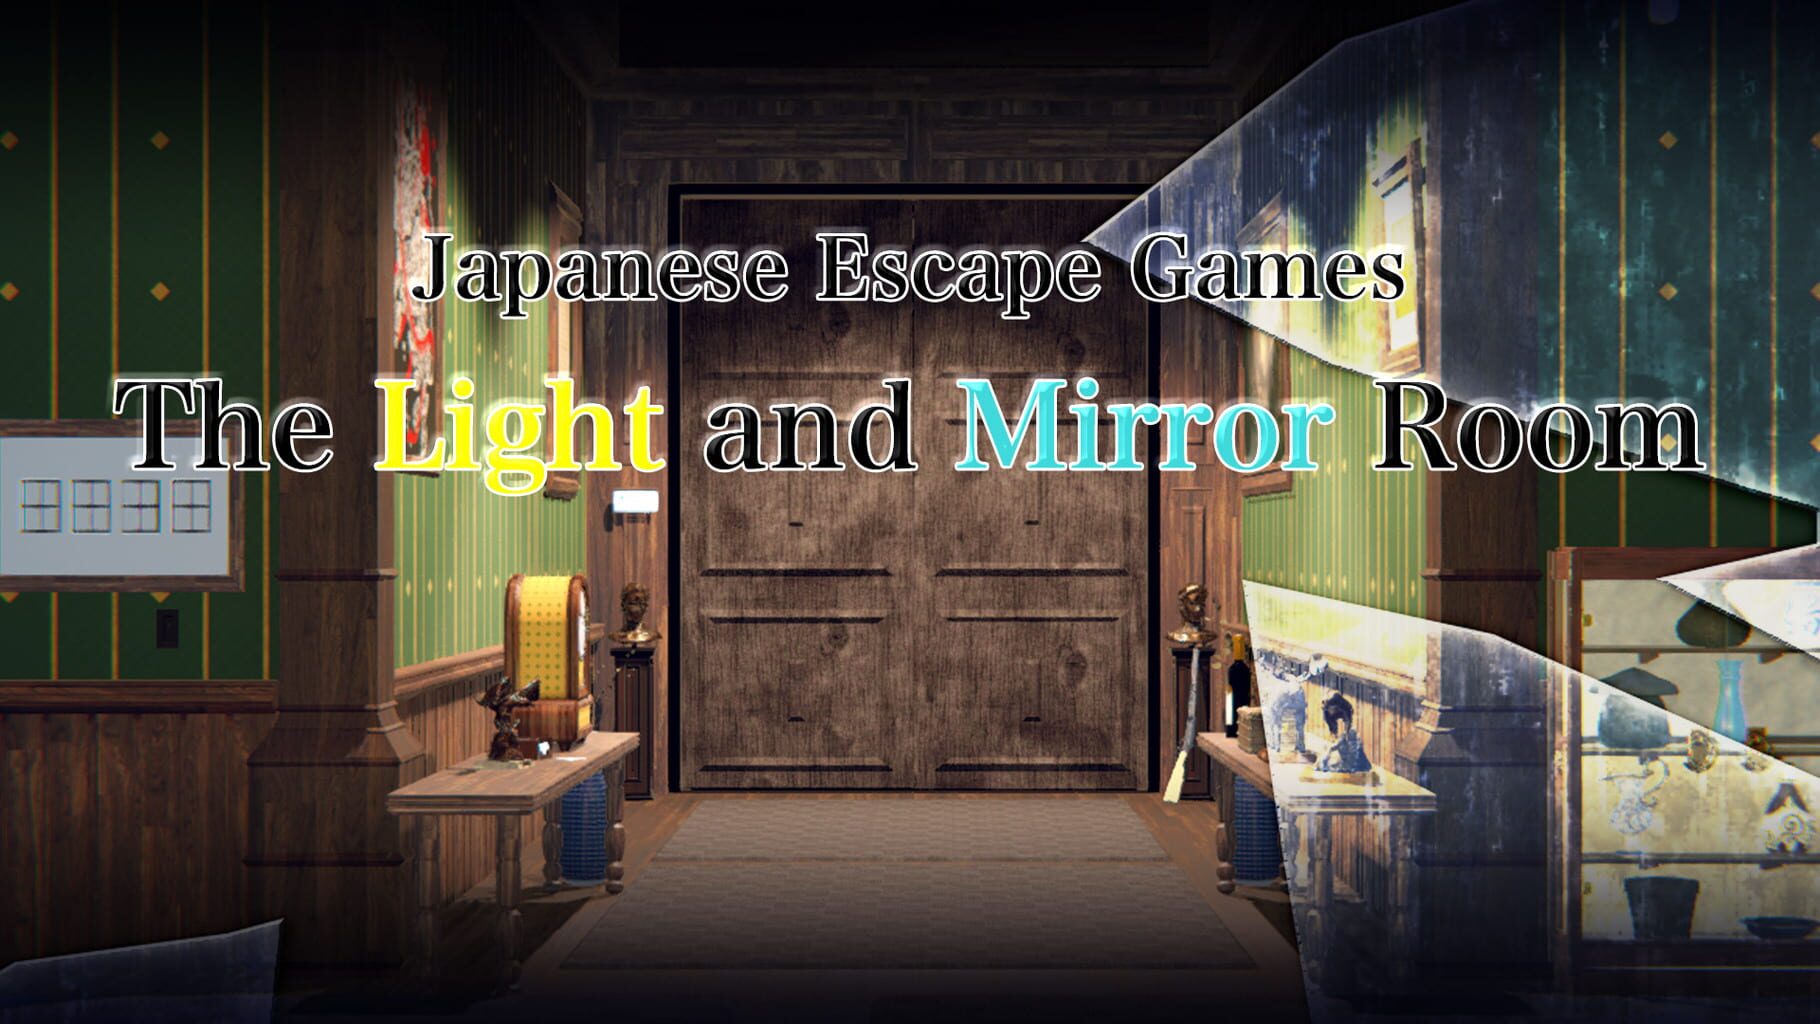 Japanese Escape Games: The Light and Mirror Room artwork